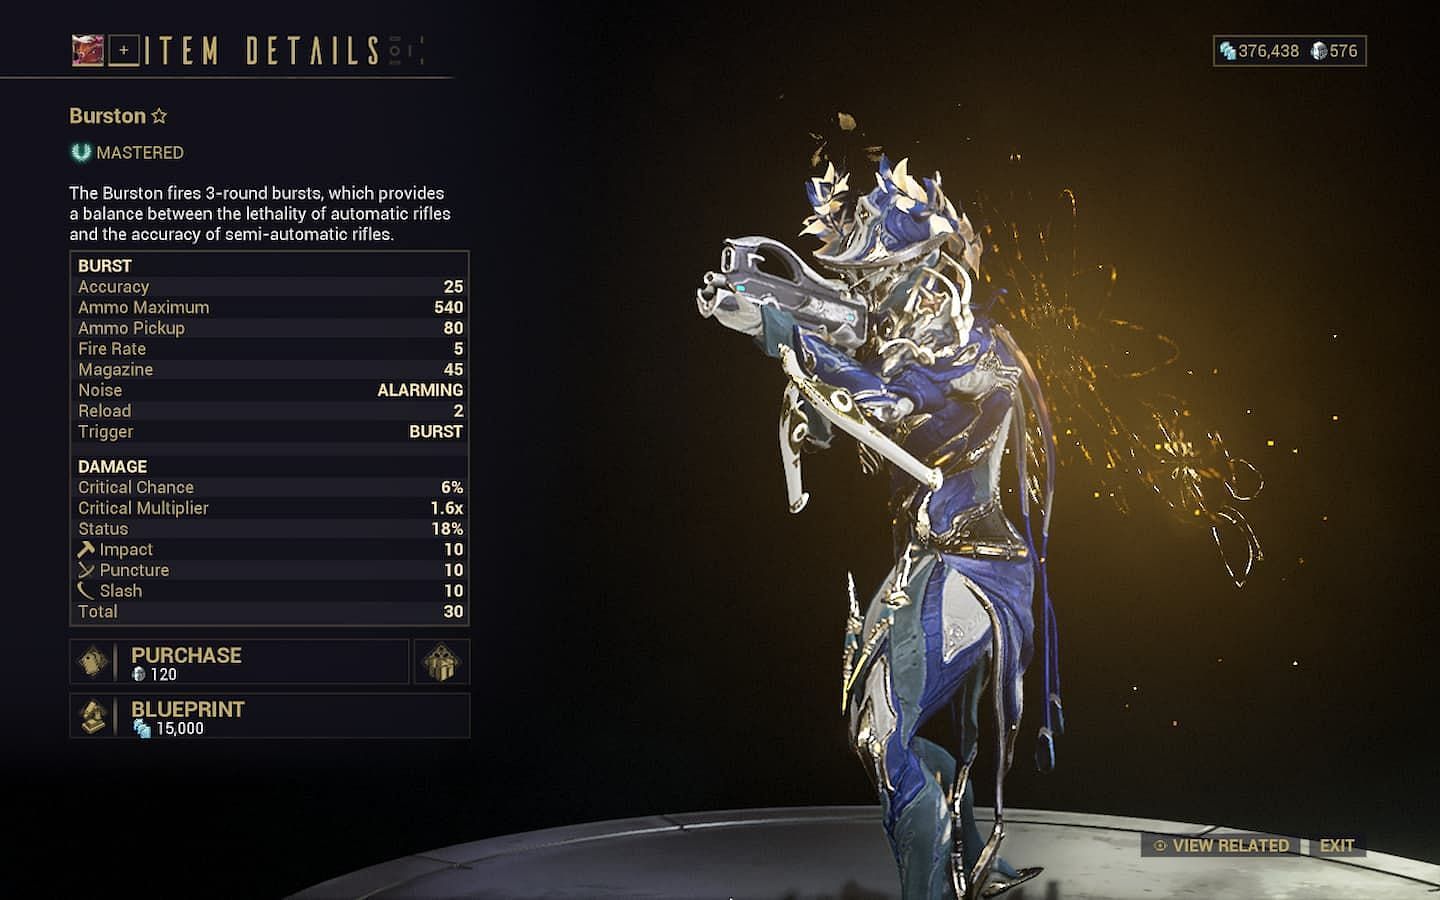 Burston is arguably the best gun at Mastery Rank 0, but at this level, all weapons are weak (Image via Digital Extremes)